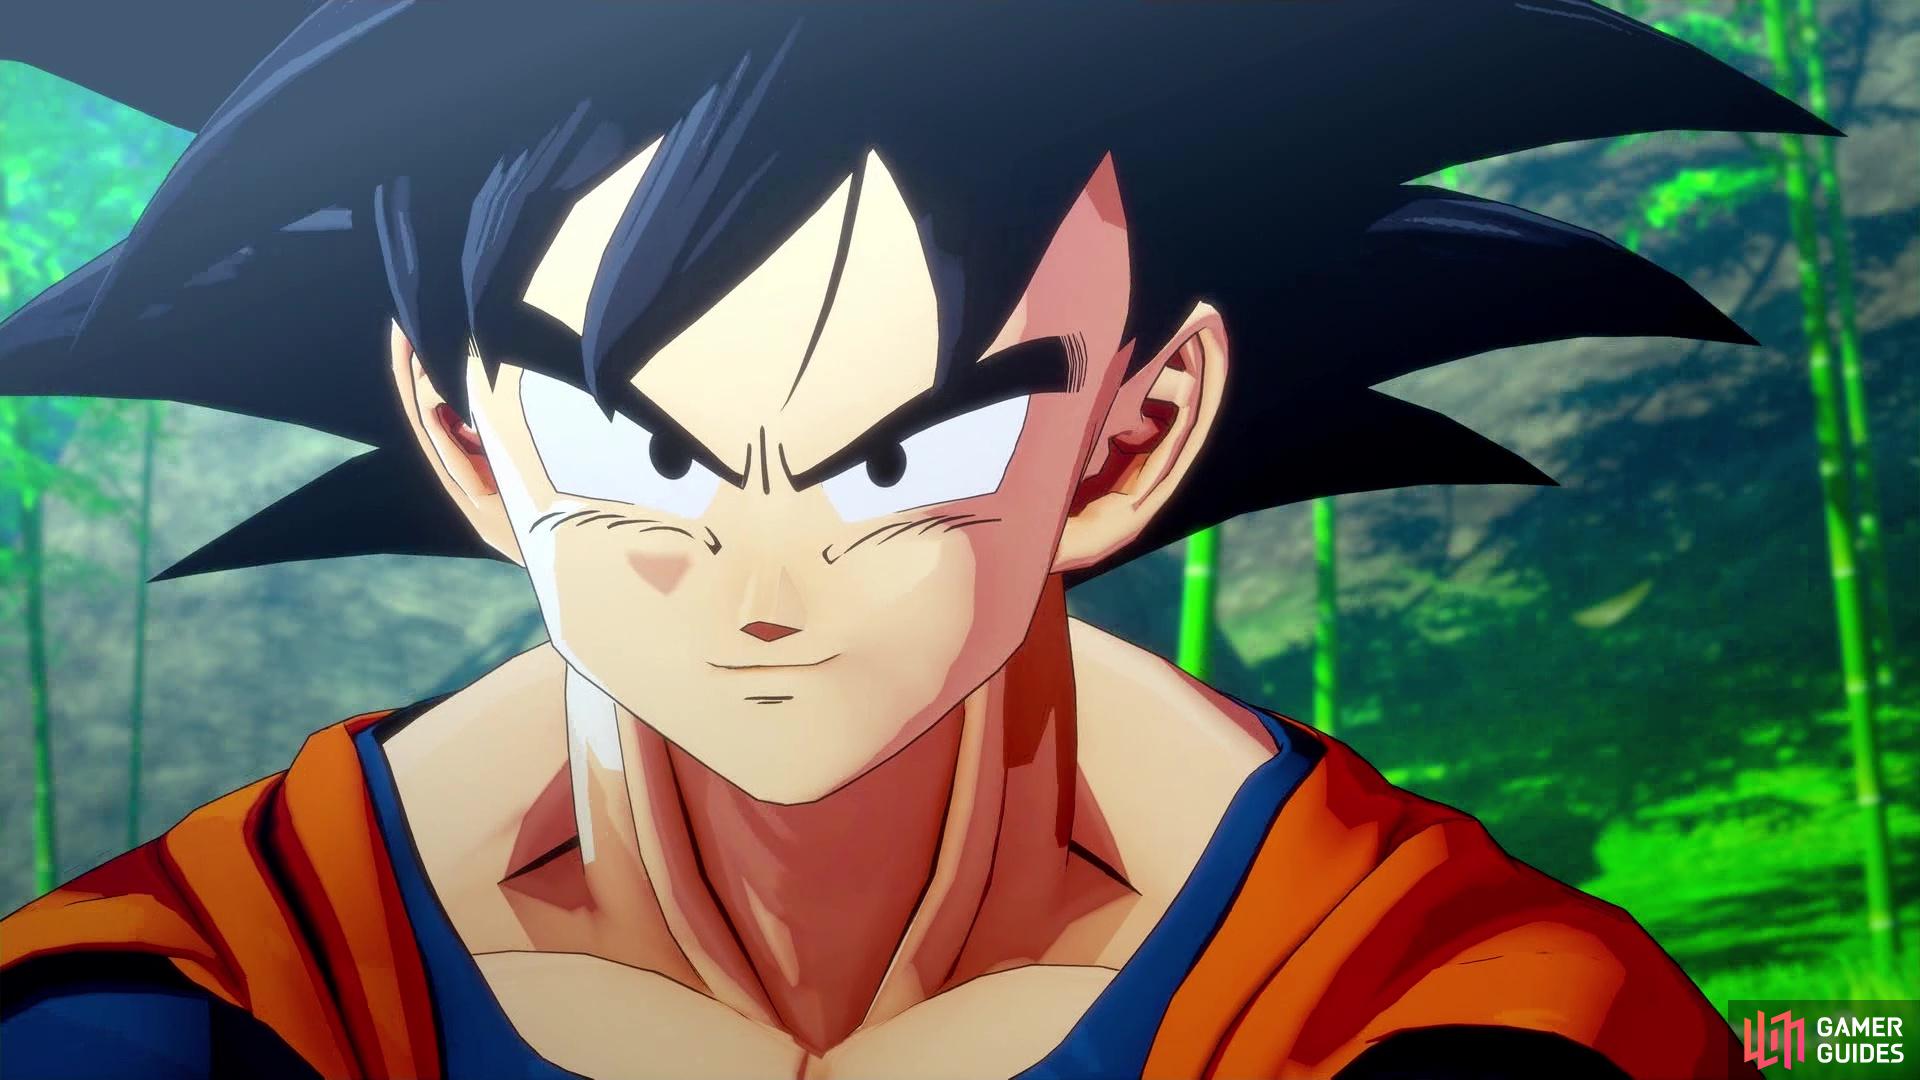 Raditz lands on earth to look for Goku, follows a decently high